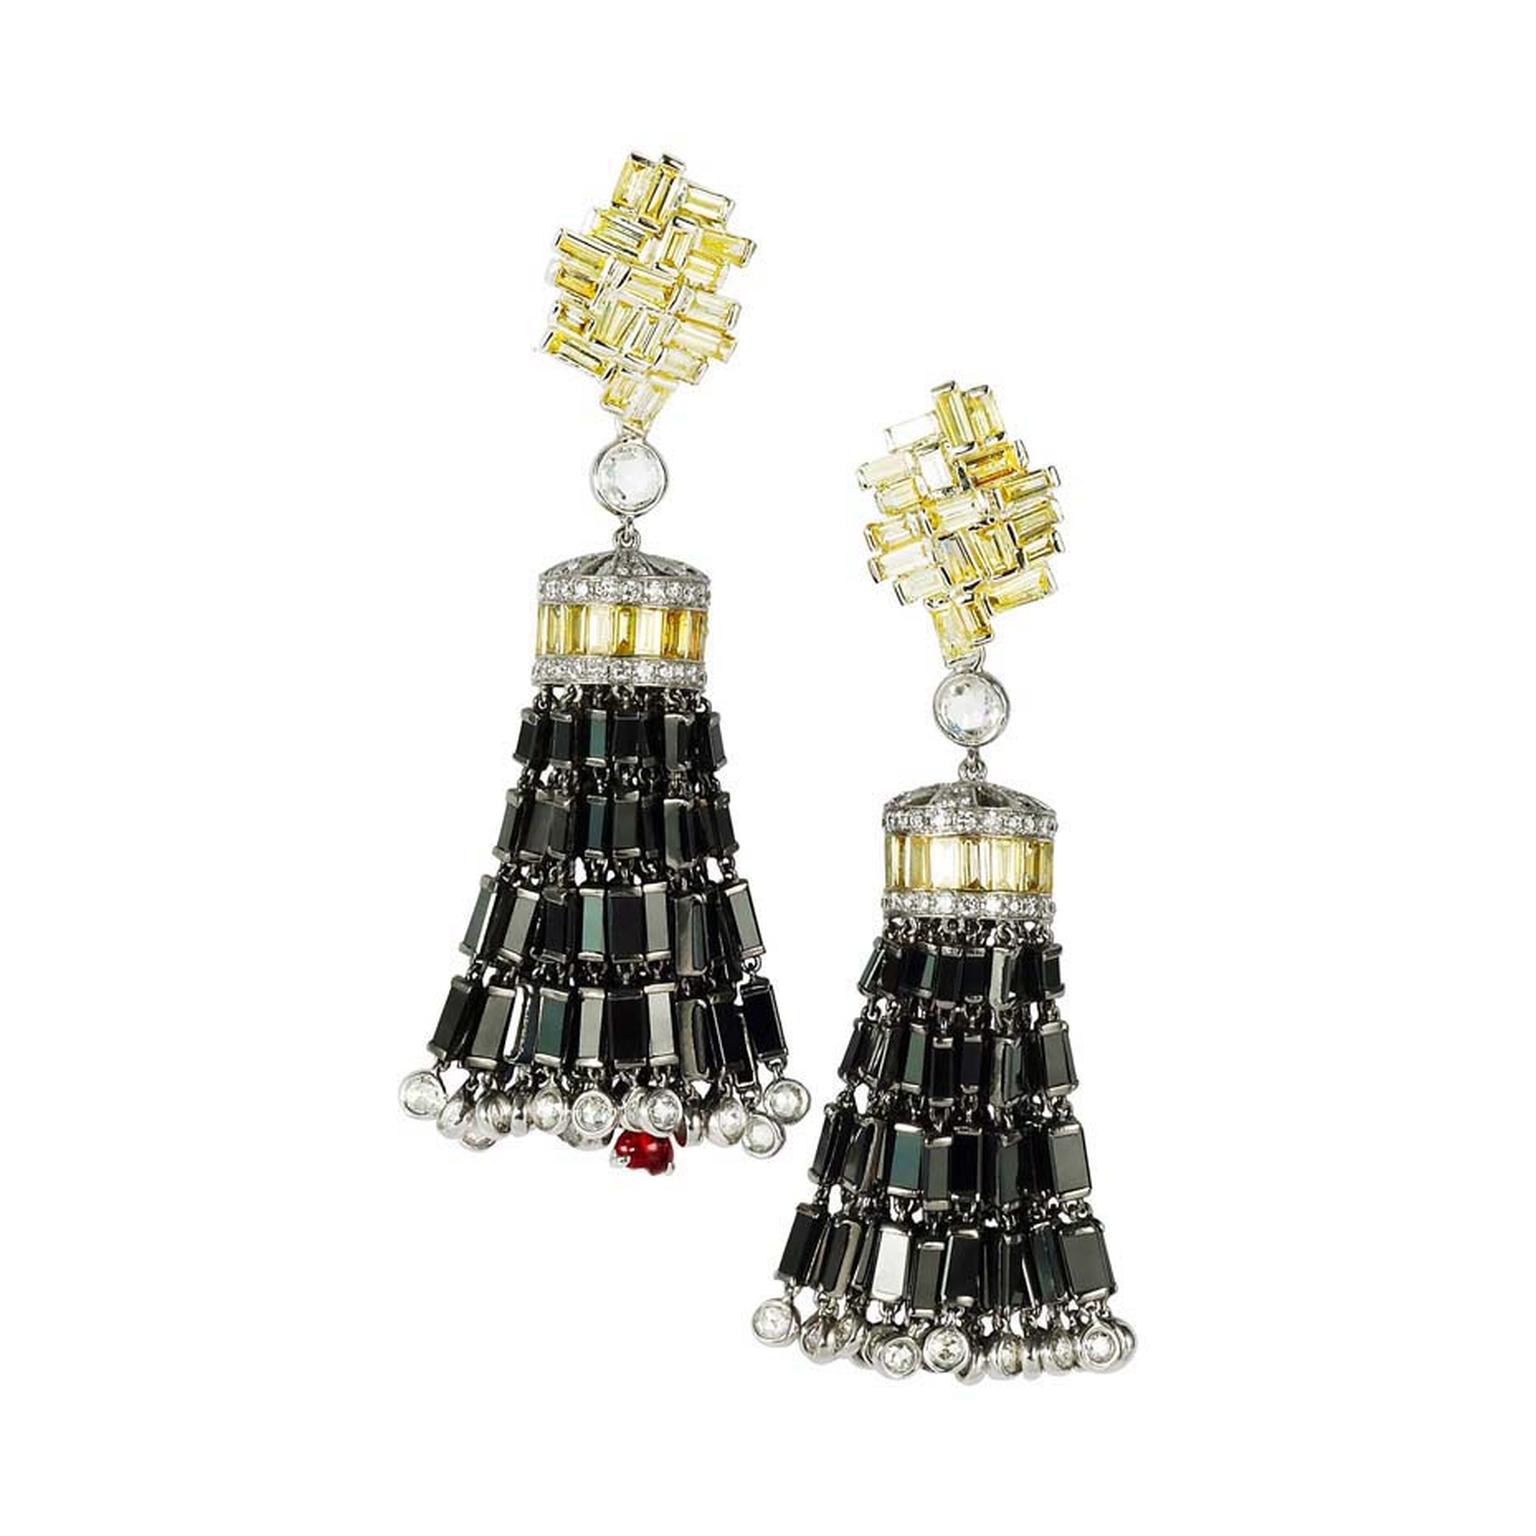 Chara Wen Eastern collection Black earrings with white, black and yellow diamonds and the brand's signature ruby.